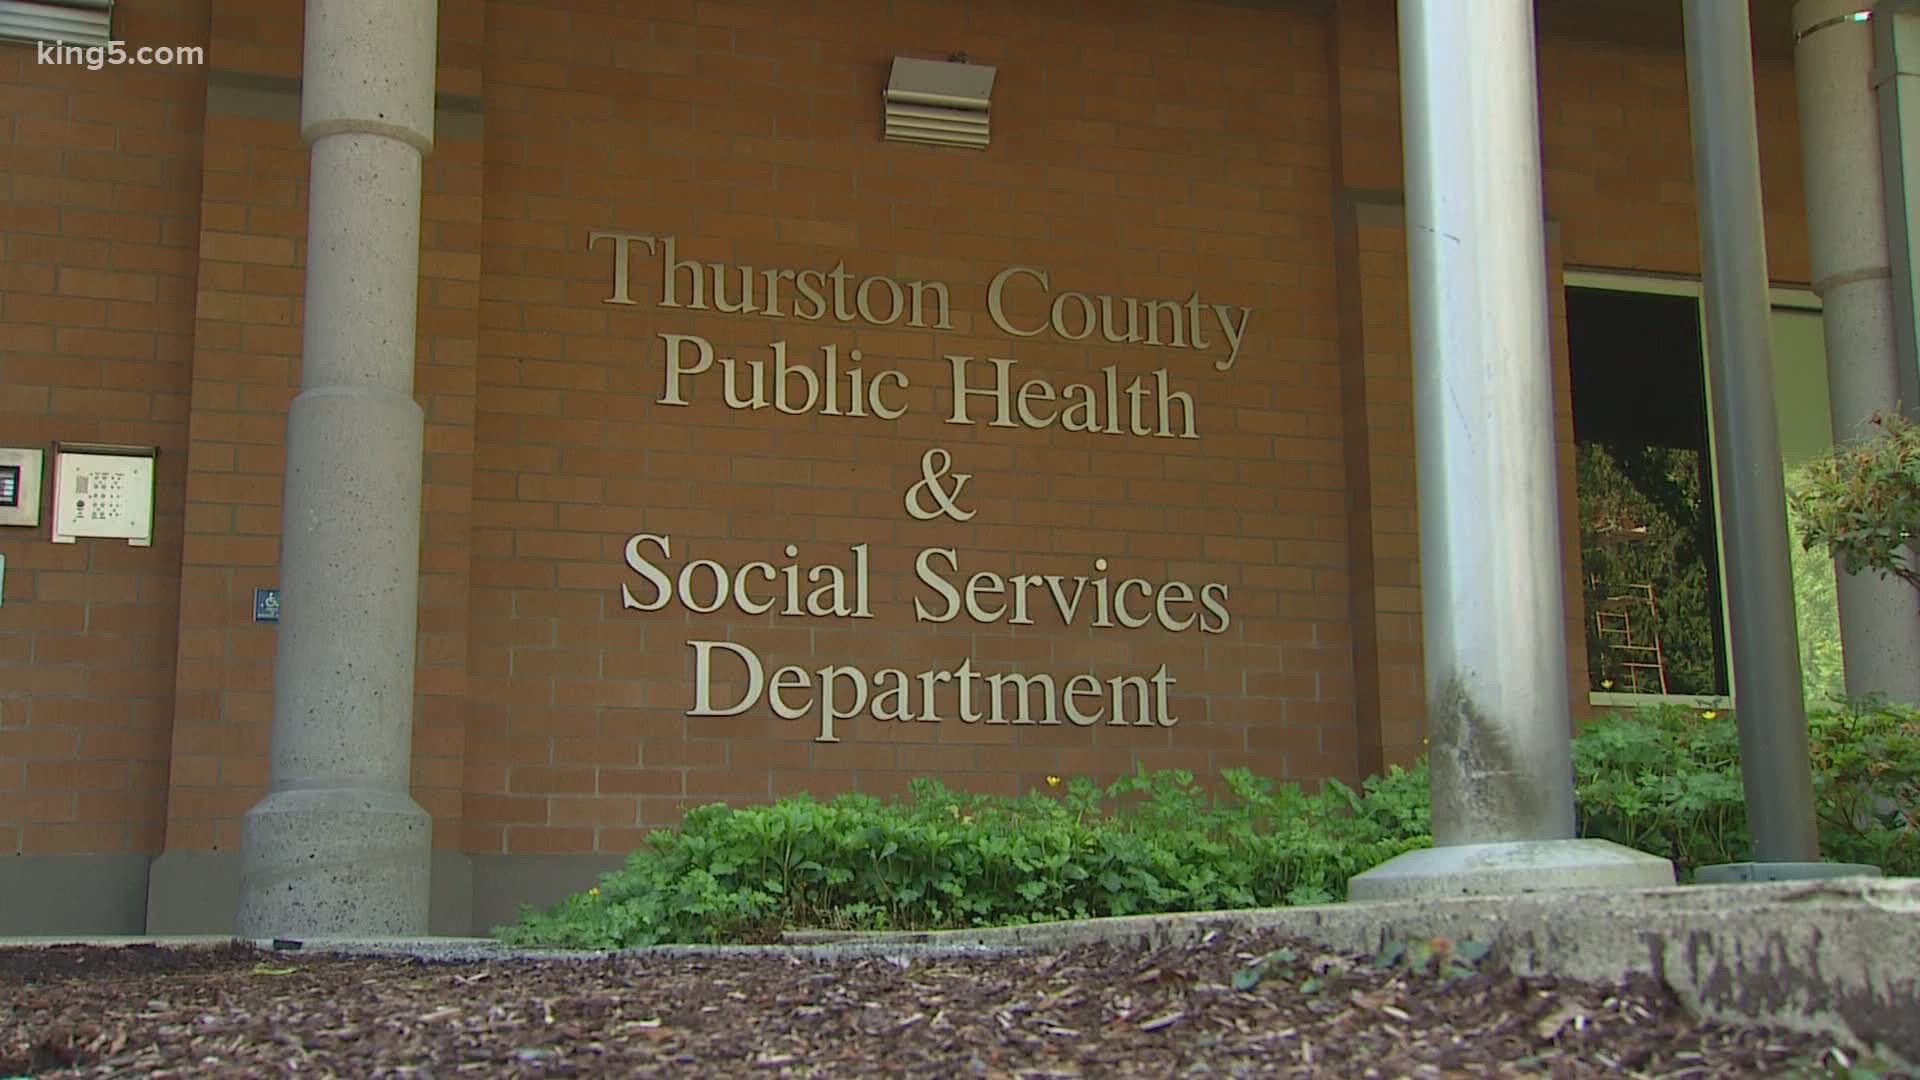 Bars, gyms, and churches in Thurston county could open, with limits, if the Washington State Department of Health grants the county’s application to move to Phase 3.